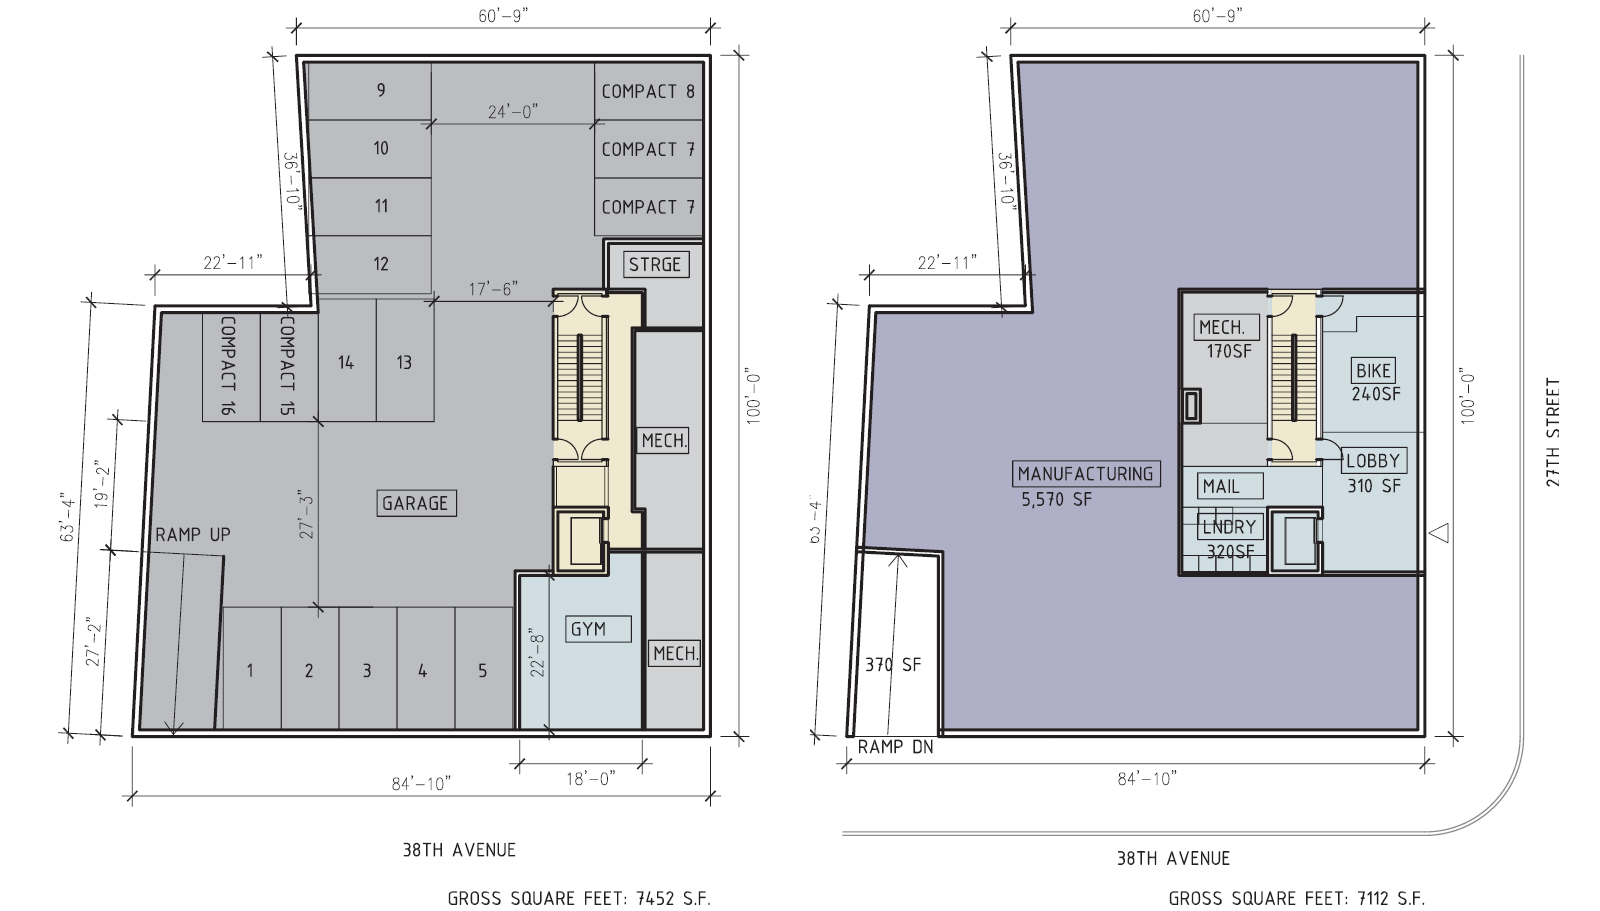 25-11 38th Avenue floor plan – cellar (left) and ground floor (right). Drawing by RSVP Studio, dated November 2013, publicly available via the Remedial Investigation Report.